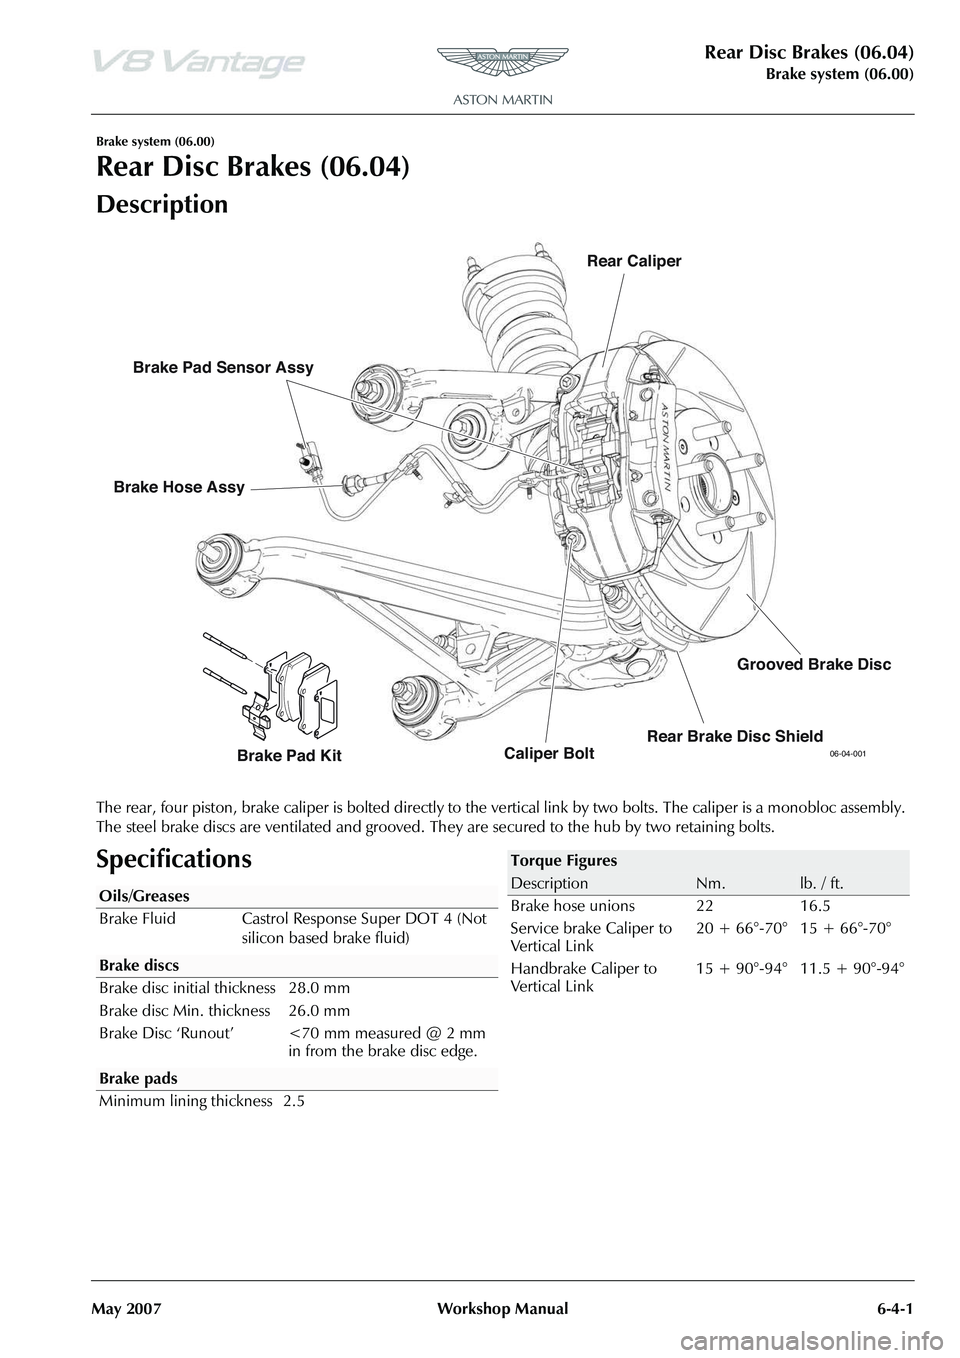 ASTON MARTIN V8 VANTAGE 2010  Workshop Manual Rear Disc Brakes (06.04)
Brake system (06.00)
May 2007 Workshop Manual 6-4-1
Brake system (06.00)
Rear Disc Brakes (06.04)
Description
The rear, four piston, brake caliper is bolted directly to the ve